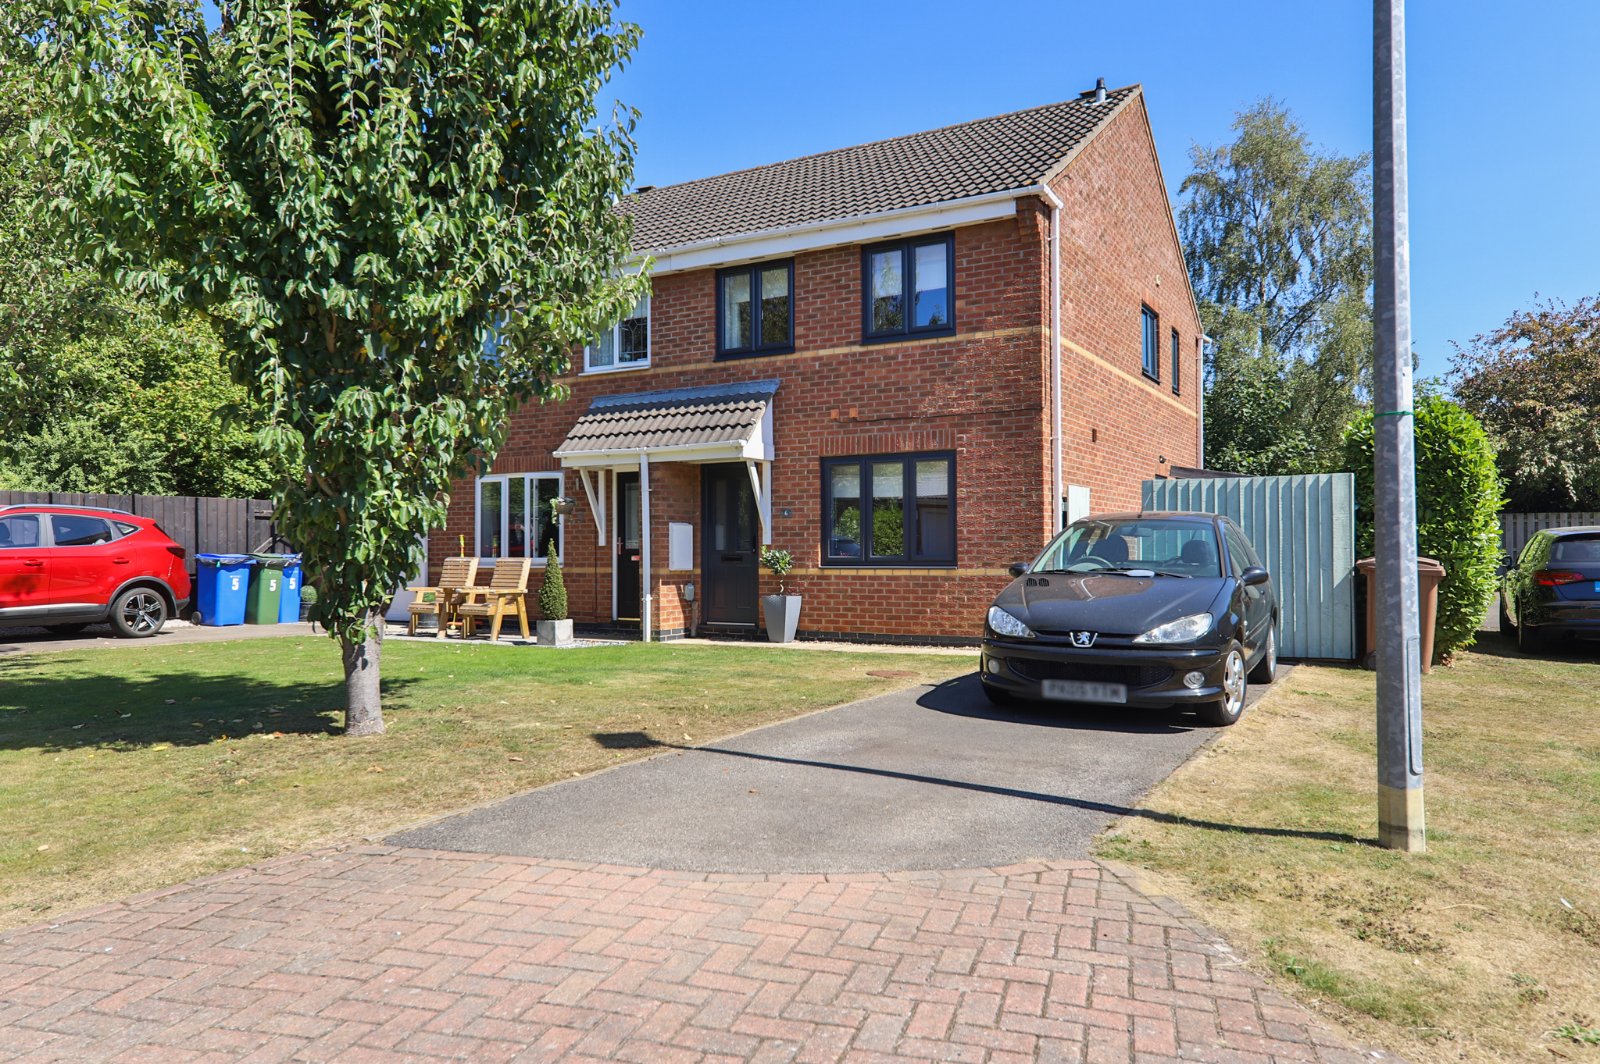 3 bed house for sale in Coltman Close, Beverley, HU17